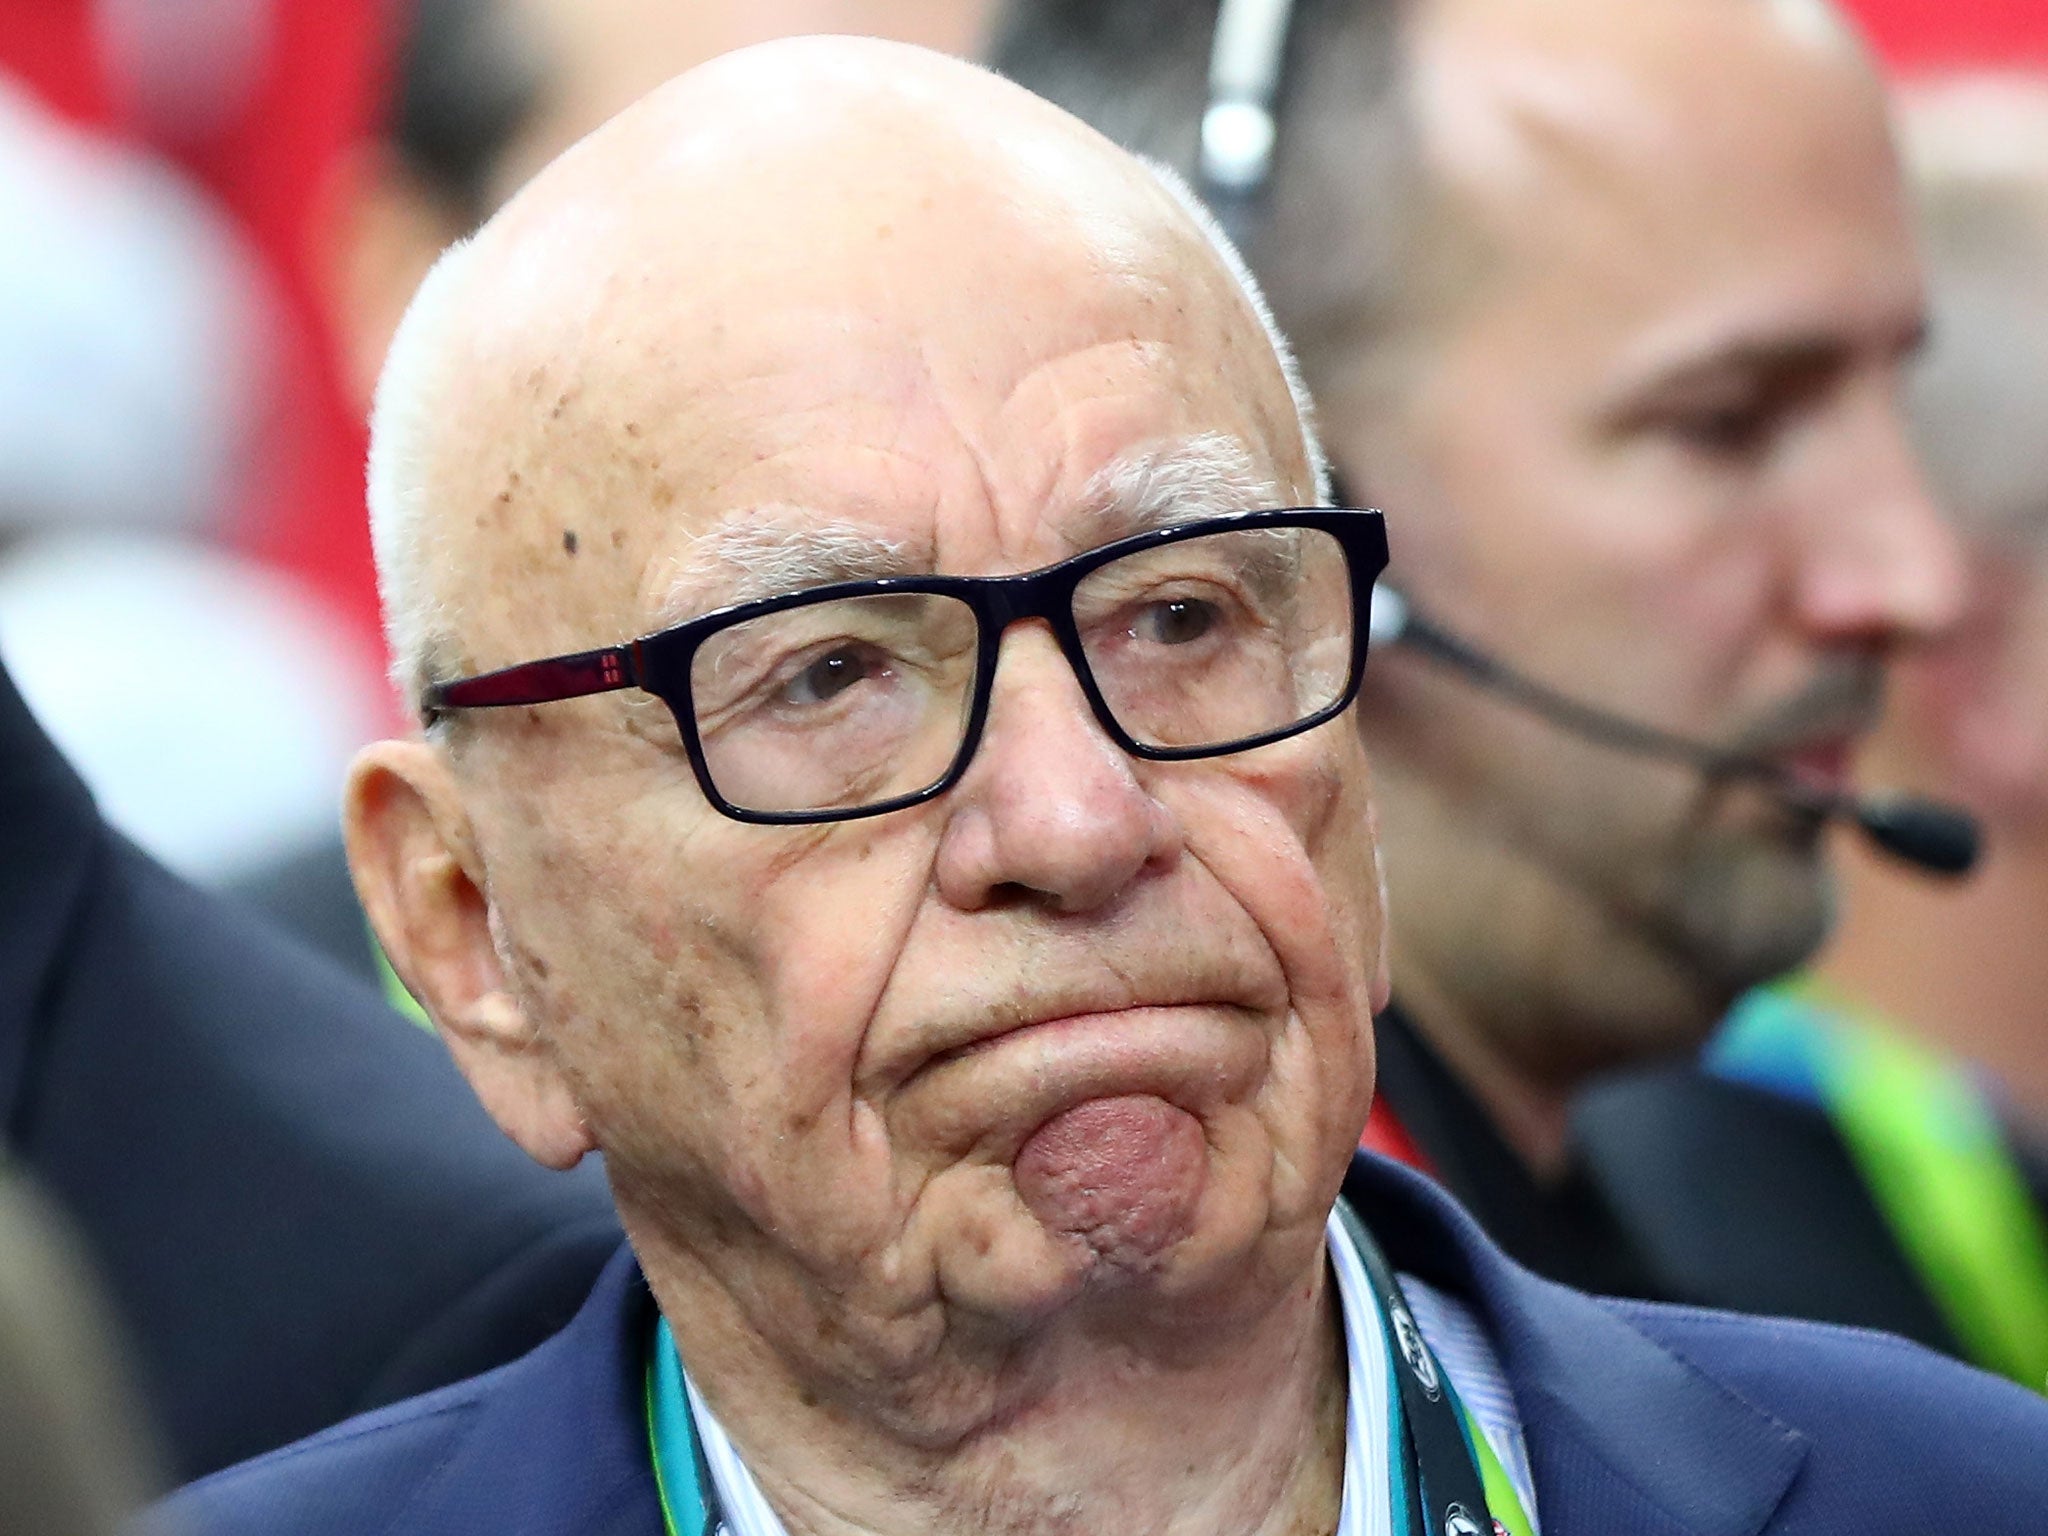 Rupert Murdoch has for years been focused on expanding his sprawling empire rather than selling assets